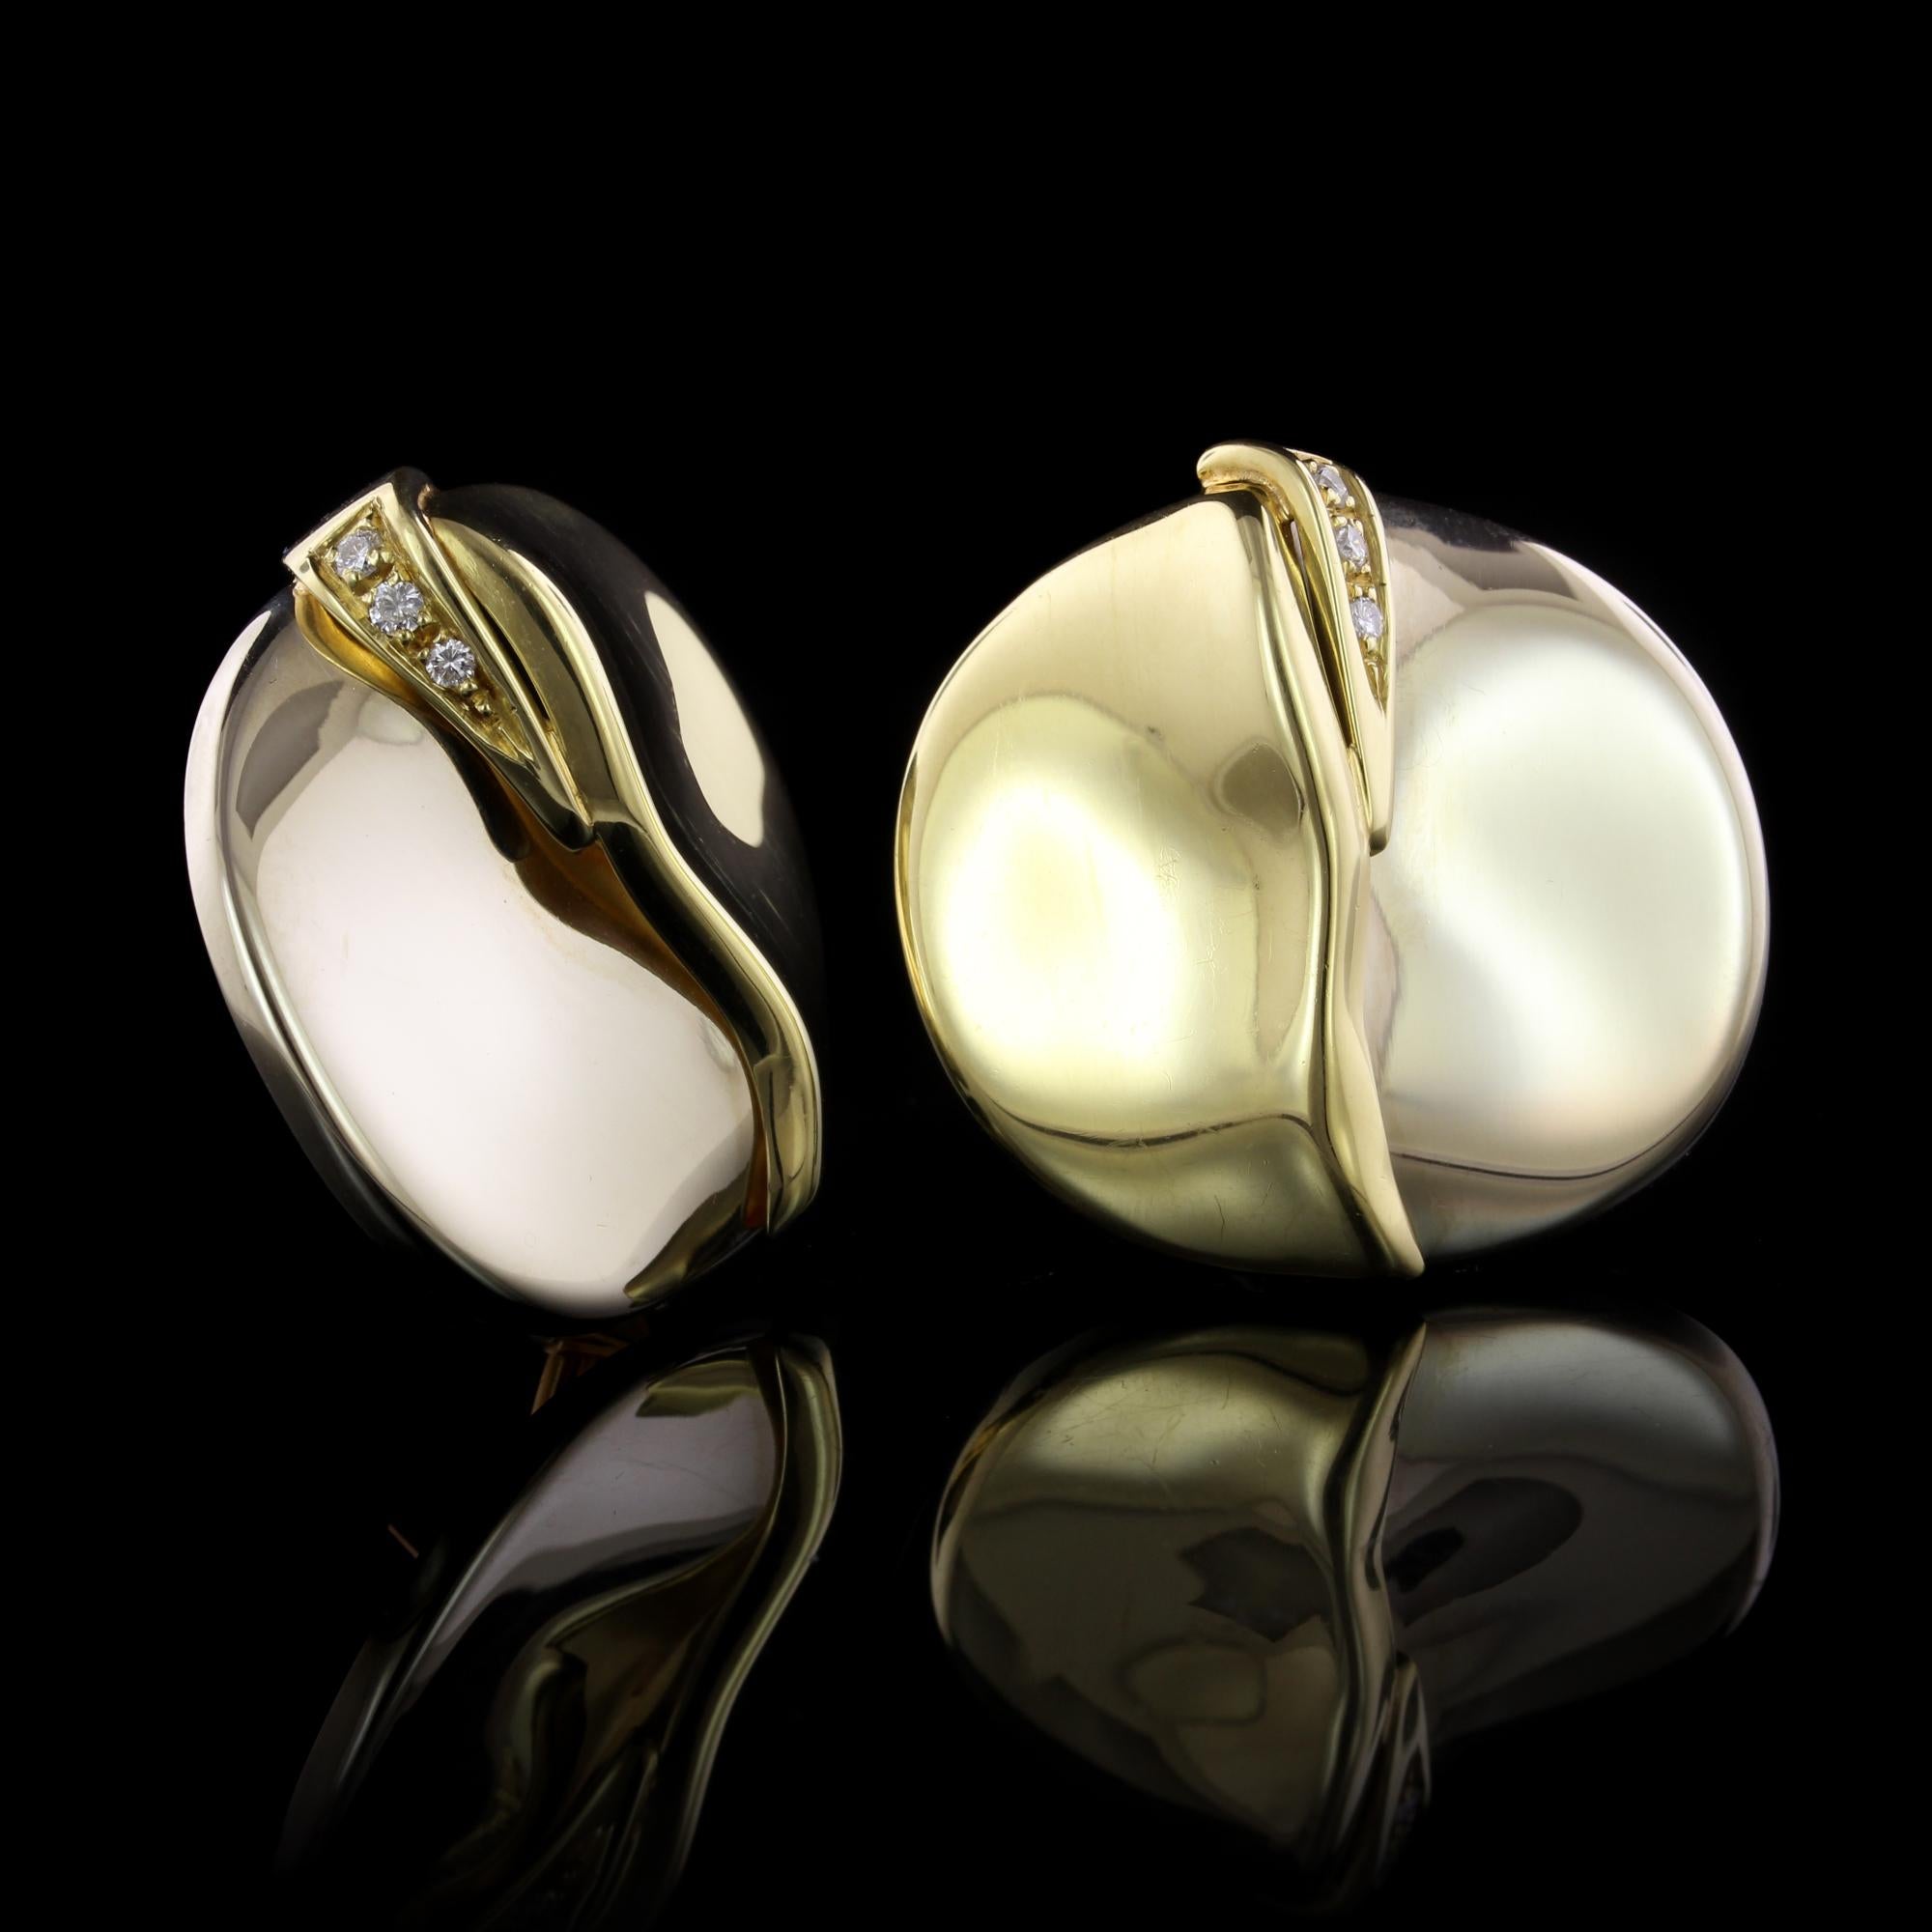 Misani 18K Two-Tone Gold and Diamond Earrings, Italy. The circular earrings are set with six full cut diamonds, approx. total wt. .10cts., FG color, VS clarity.